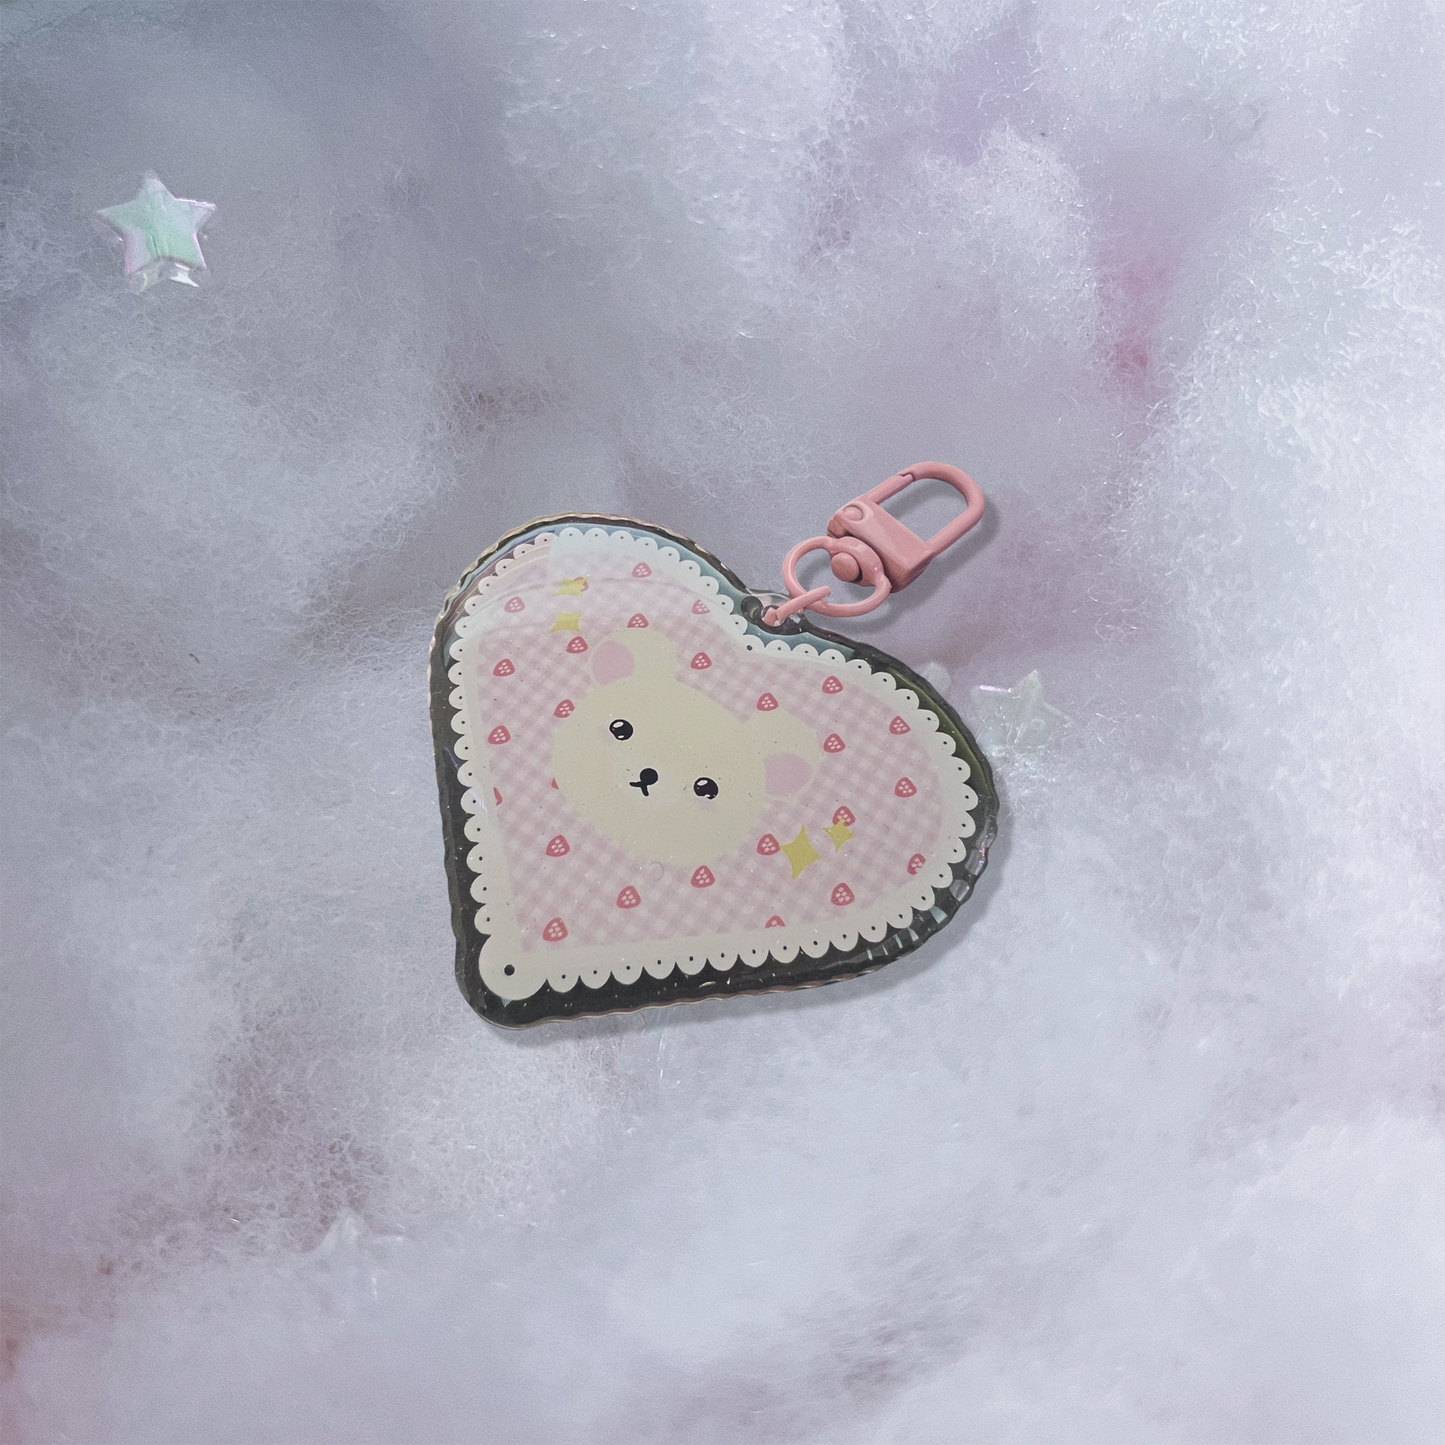 White bear acrylic keychain with micro-glitter finish and pink hook.